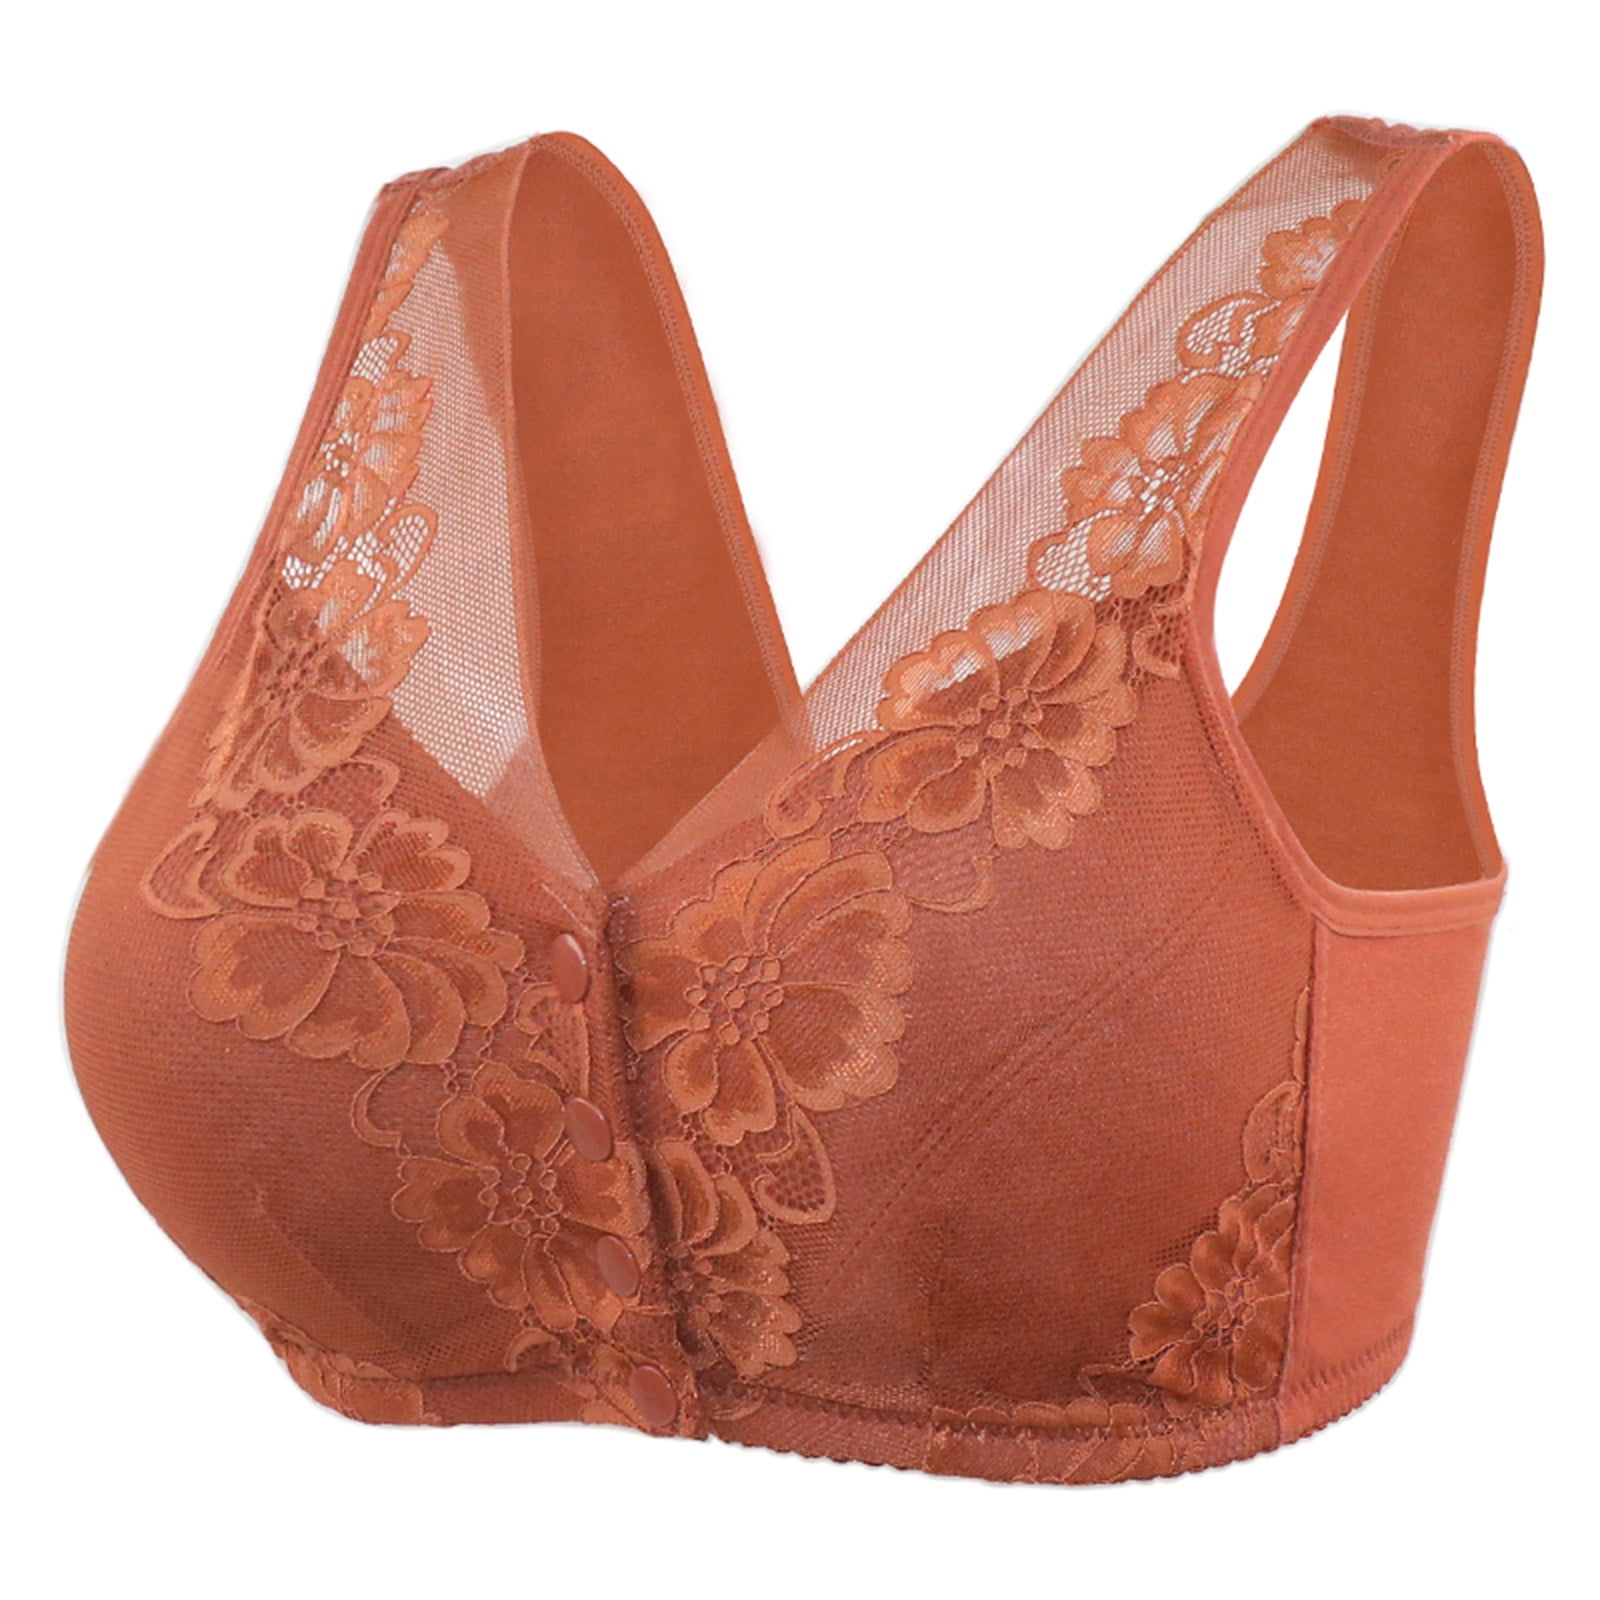 adviicd Under Outfit Bras for Women Women's Full Coverage Front